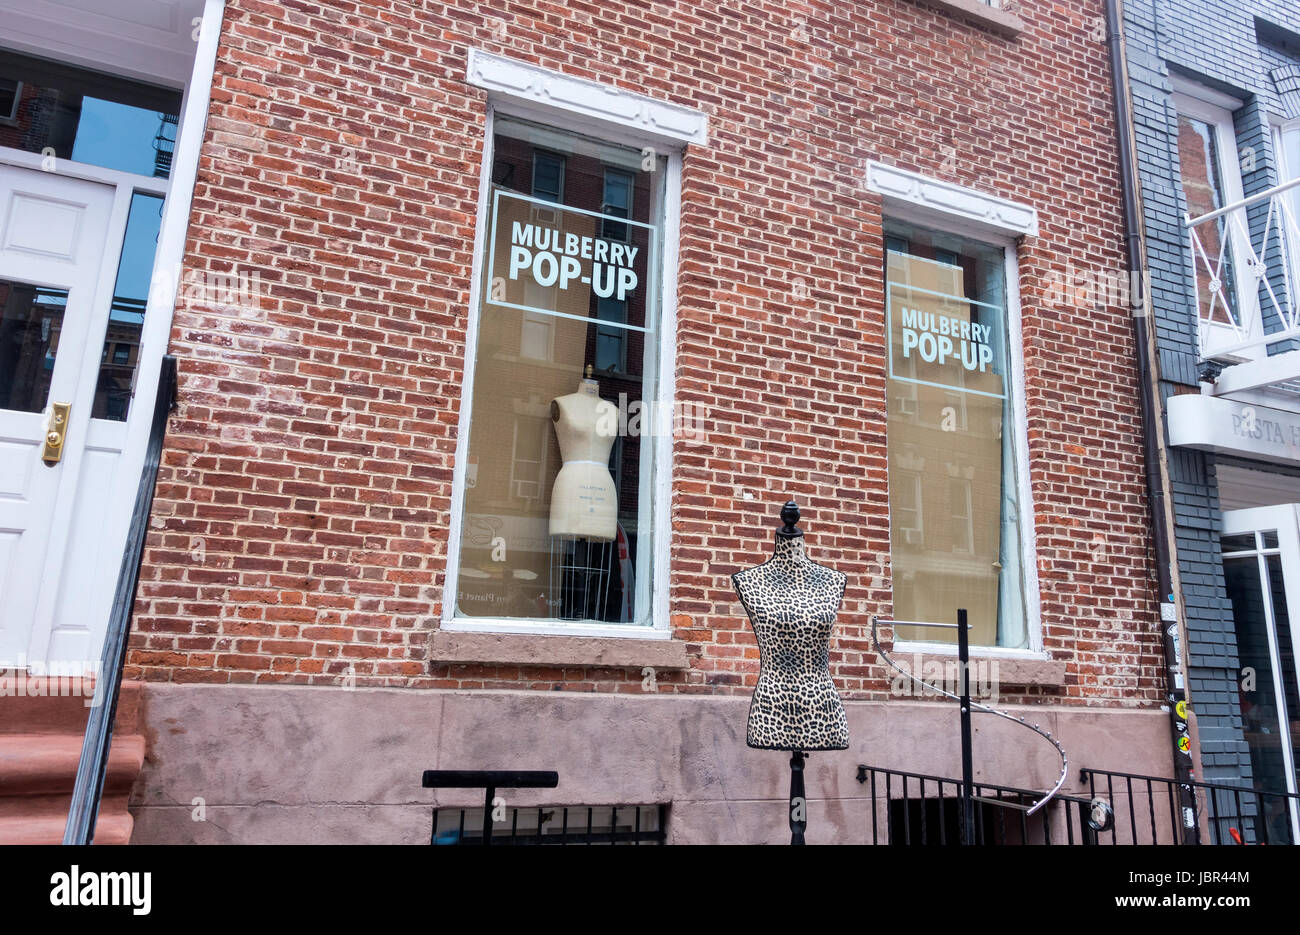 Mulberry pop-up shop in Little Italy, New York City Stock Photo